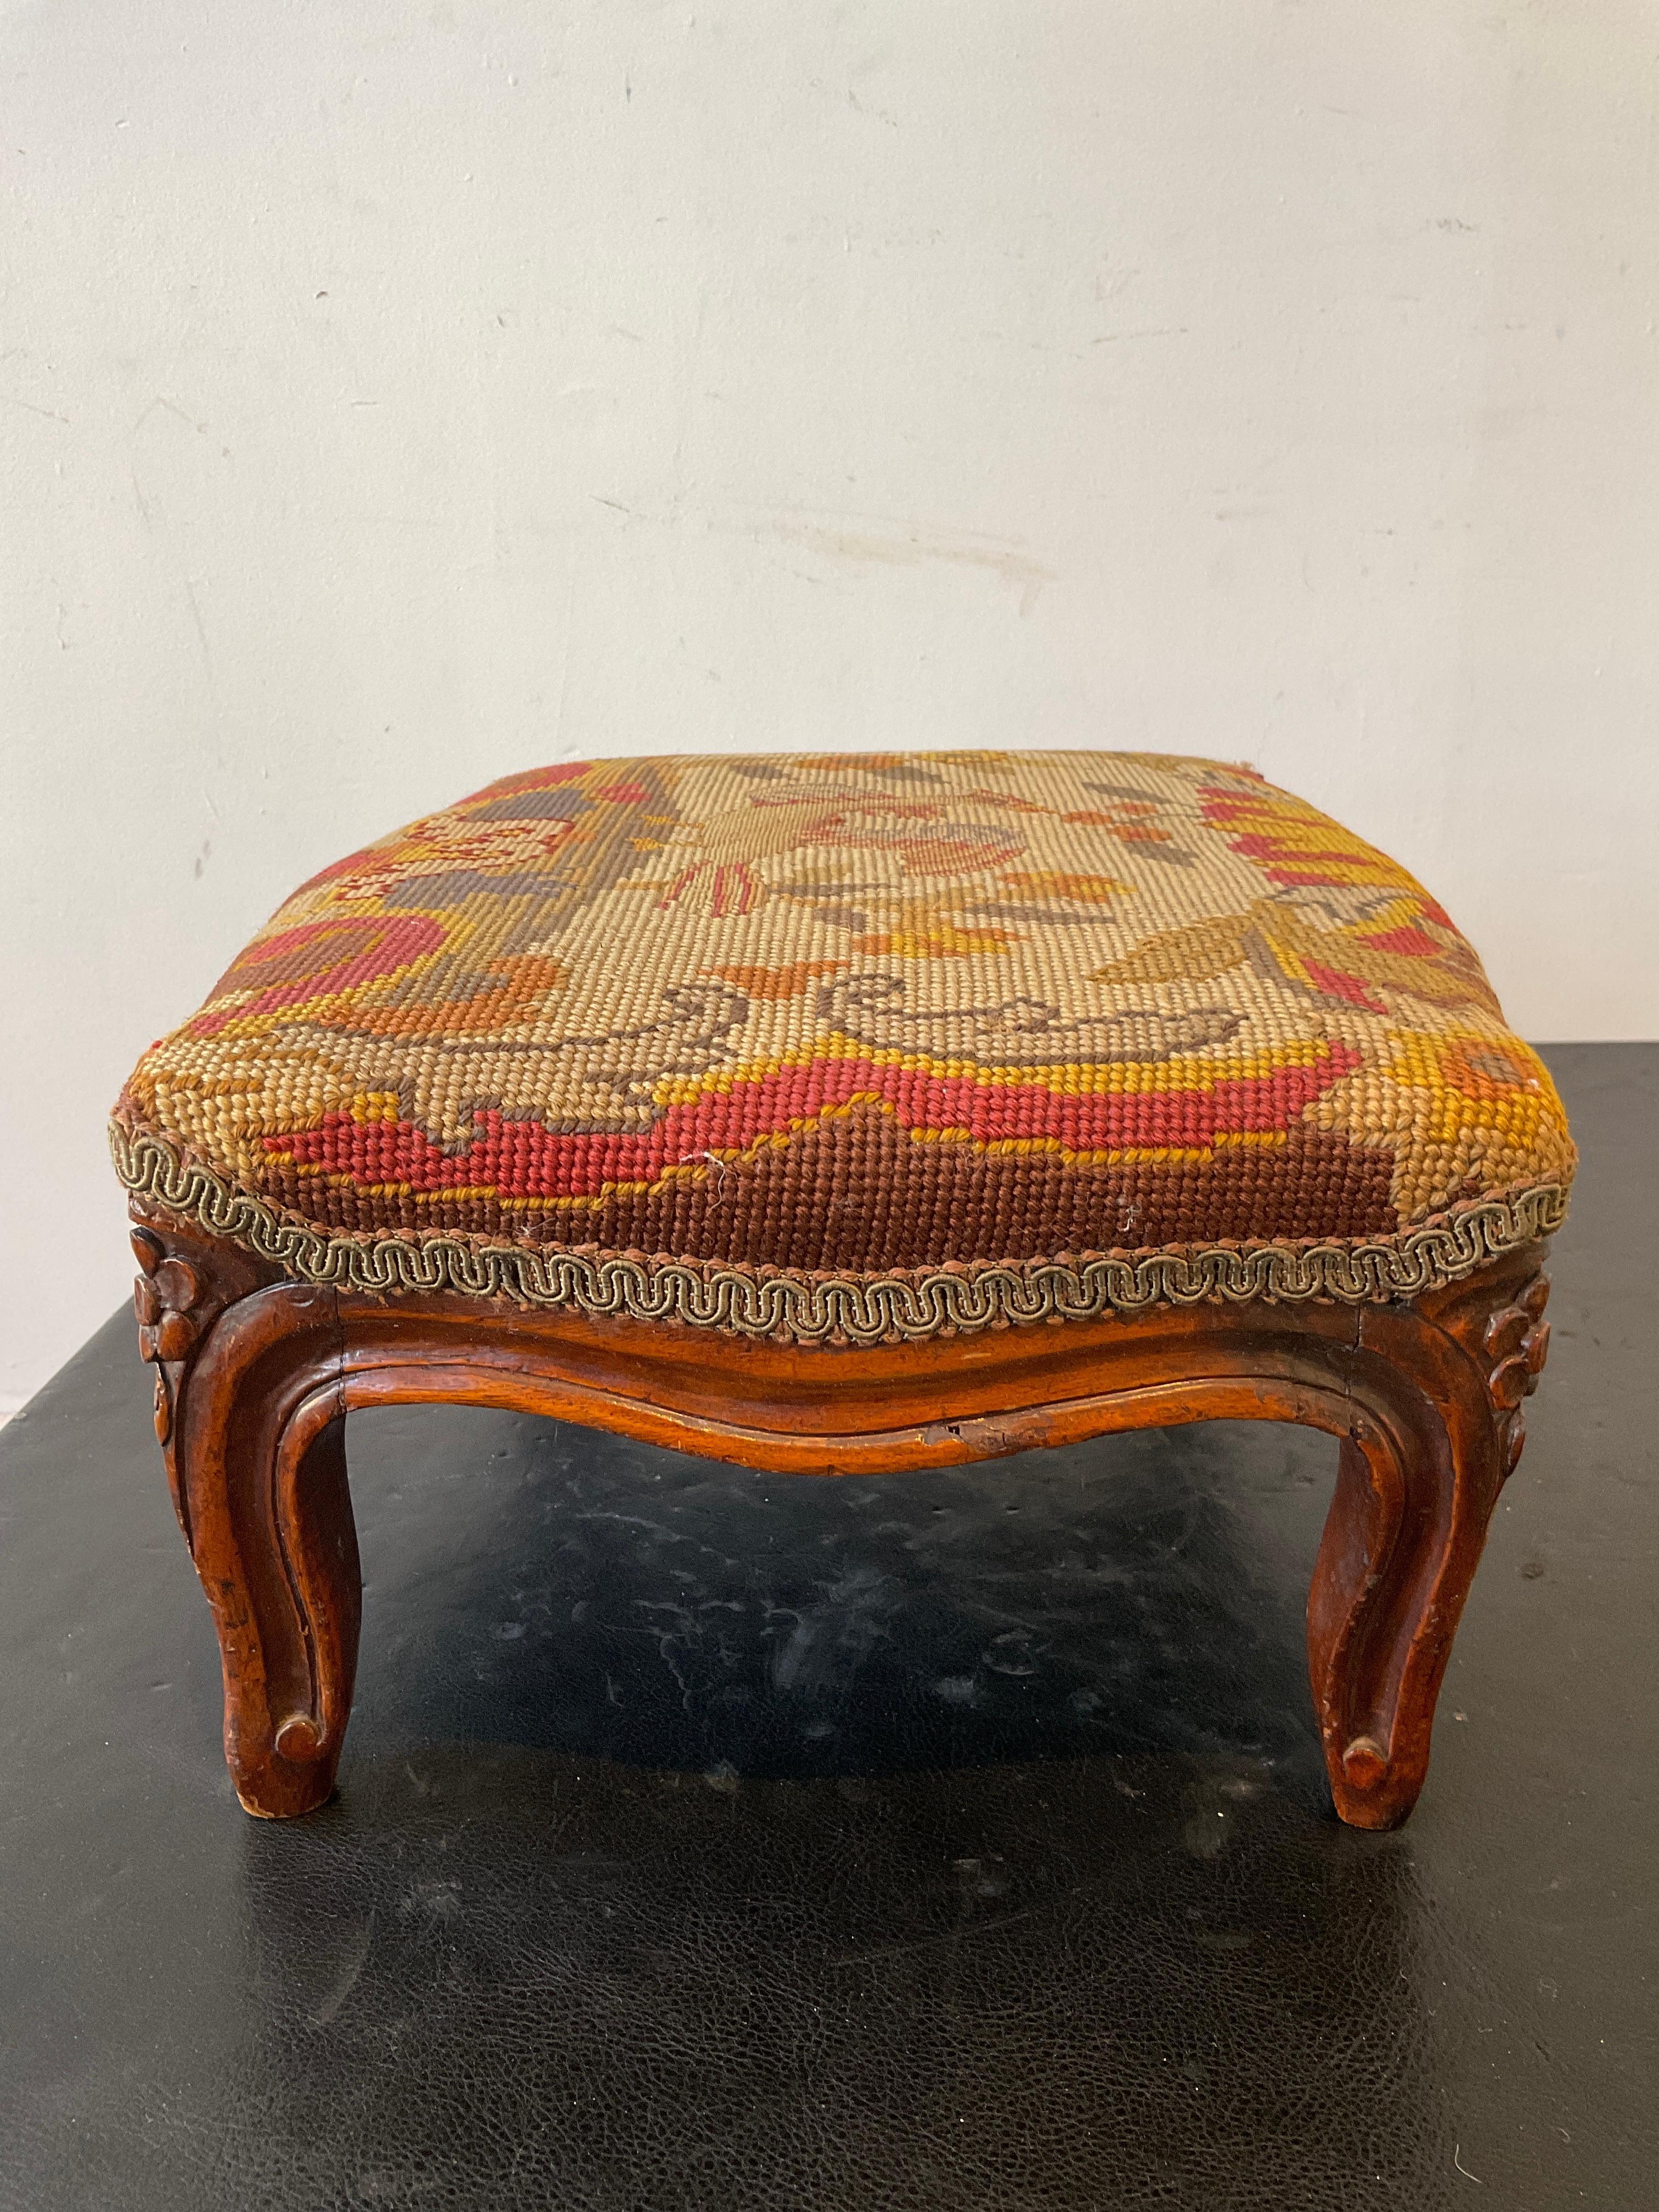 1910 French Hand Carved Wood Footstool with Needlepoint Top For Sale 2